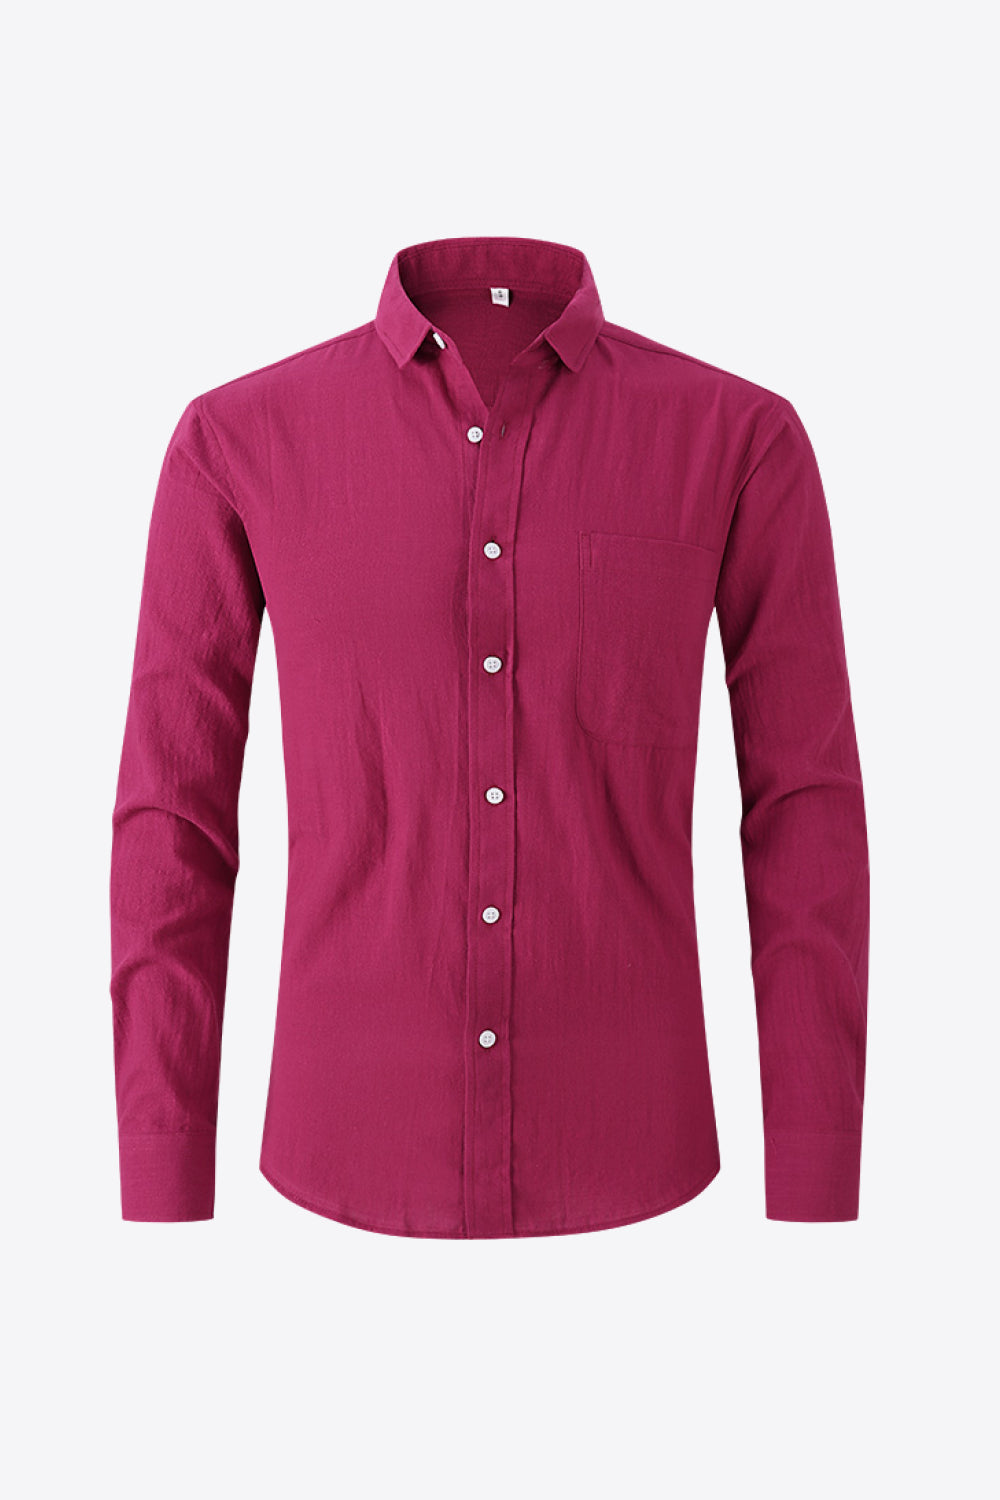 Buttoned Long-Sleeve Collared Shirt